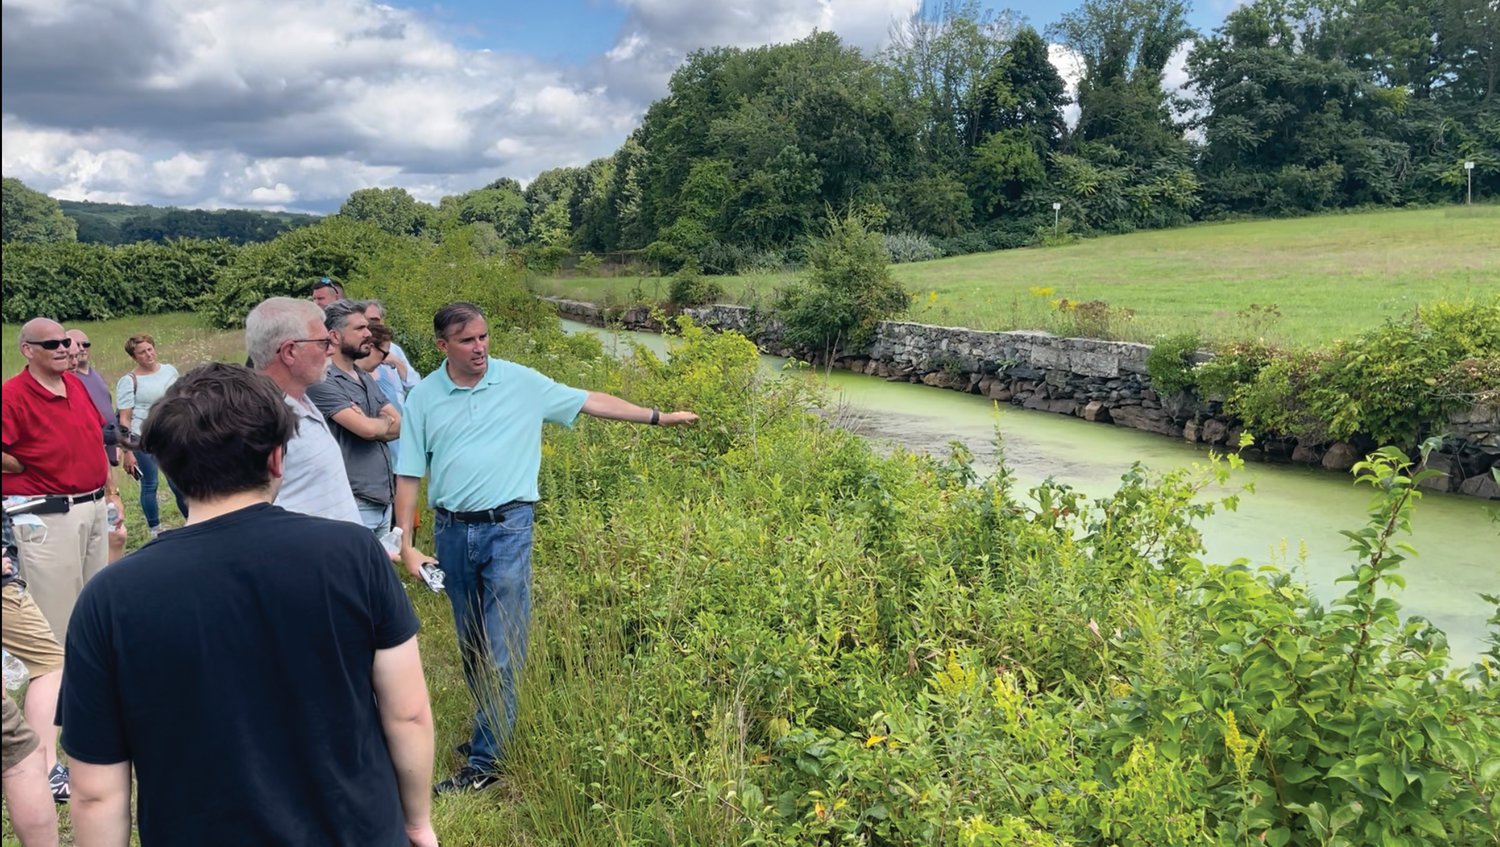 THE CANAL: Chris Reynolds of Brady Sullivan Properties points to the canal that runs south from the Cranston Print Works Pond. Still filled with water, the canal has sat stagnant for years. Addressing its future will require significant discussions with DEM and other entities, Reynolds said